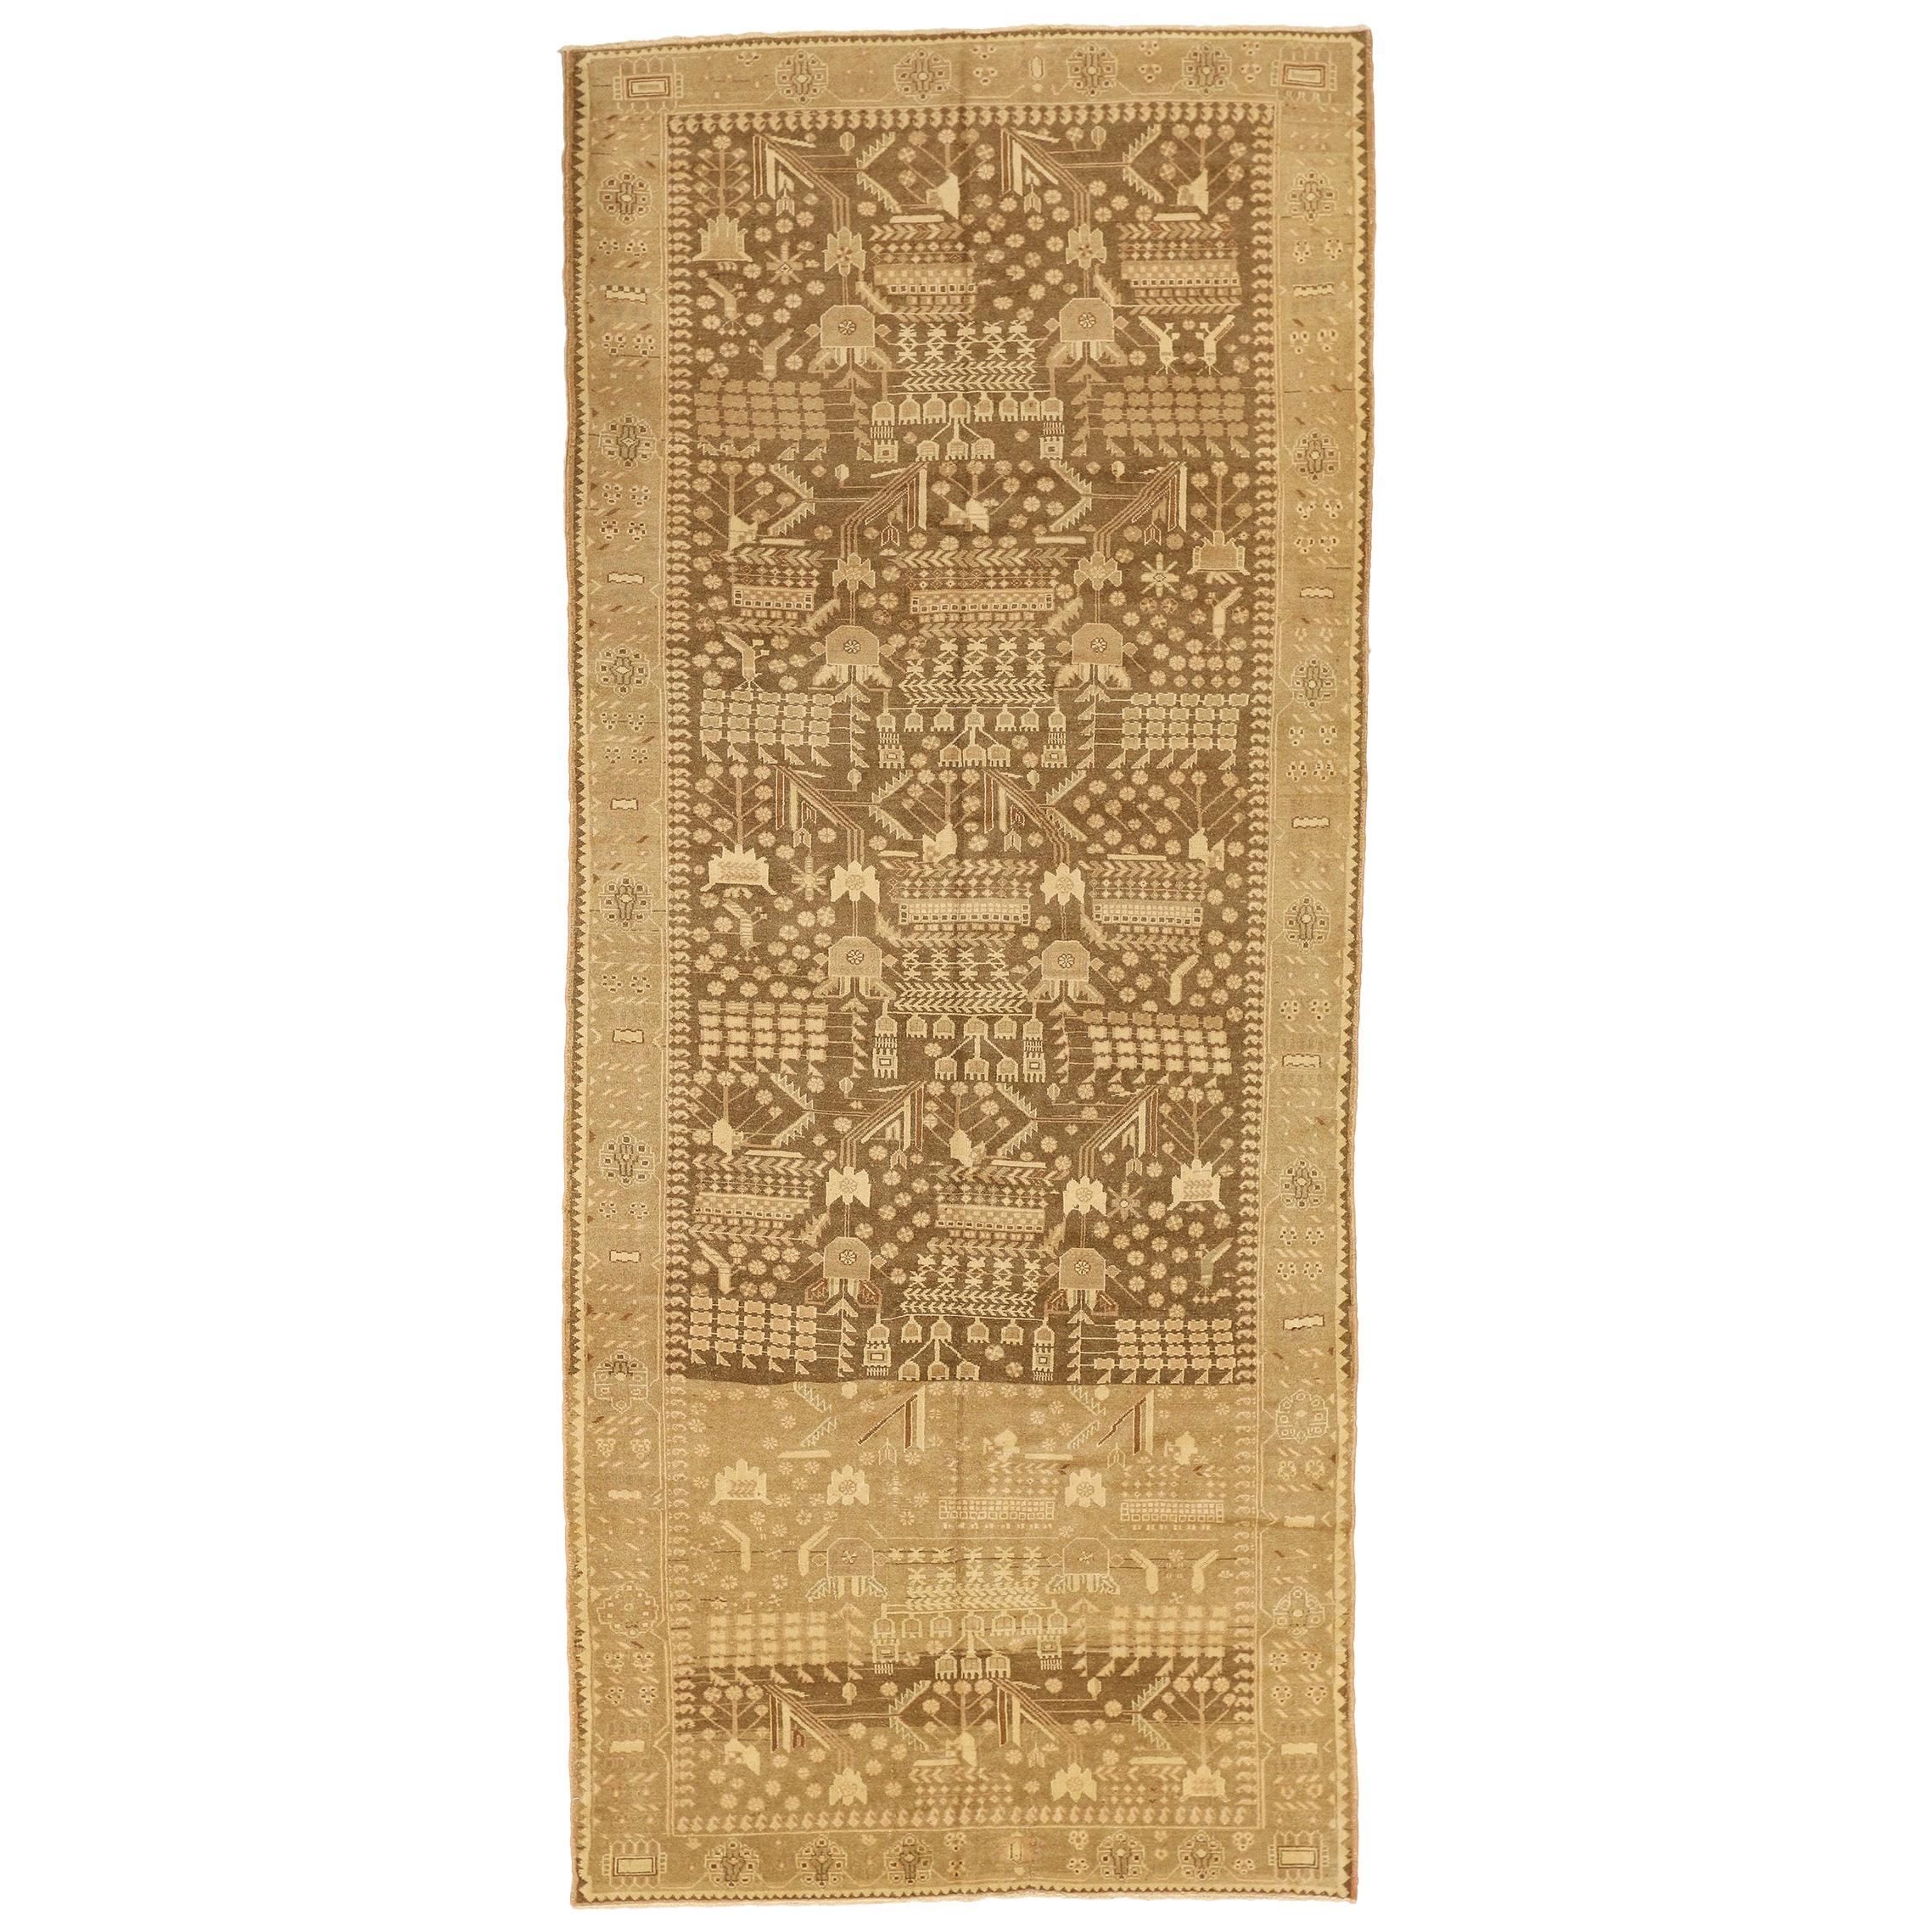 Antique Persian Saveh Rug with Beige and Ivory Botanical Details